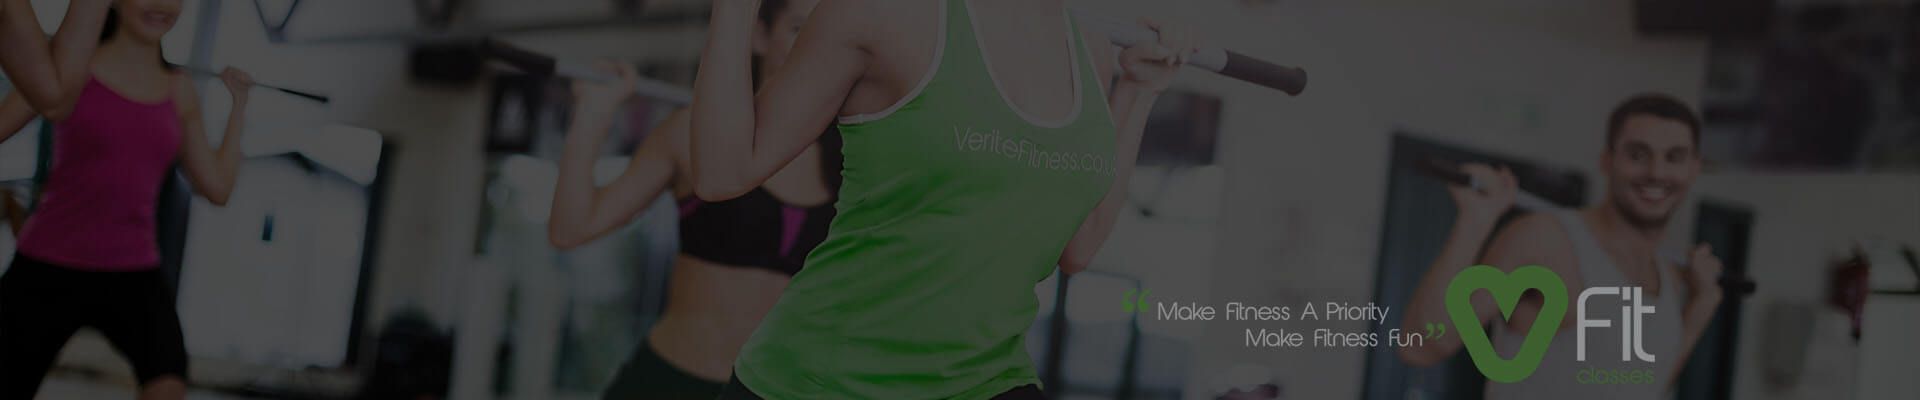 V- Fit Classes Southport Banner